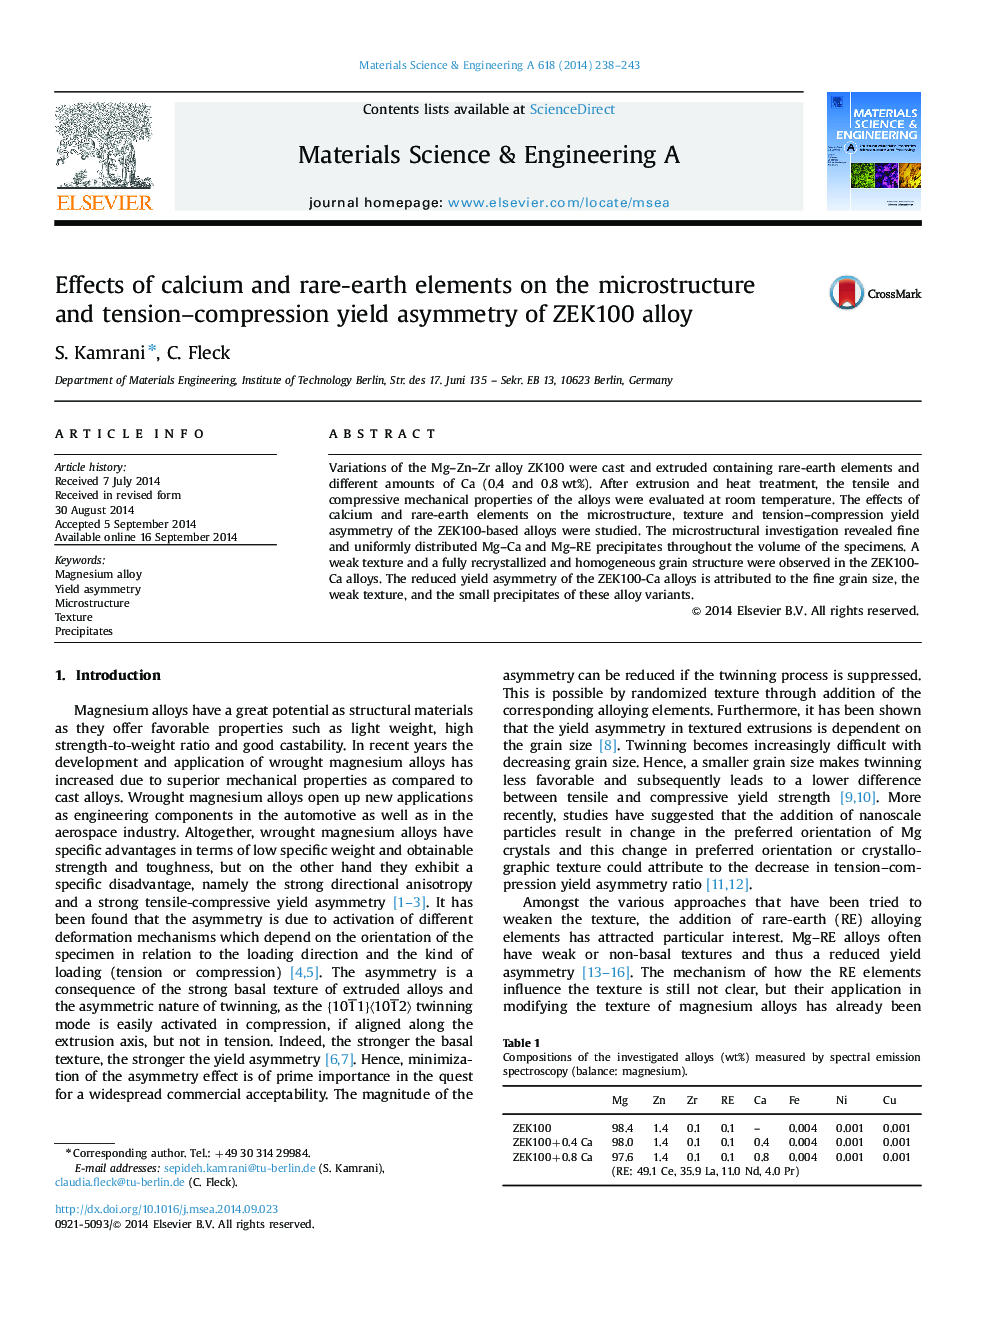 Effects of calcium and rare-earth elements on the microstructure and tension–compression yield asymmetry of ZEK100 alloy